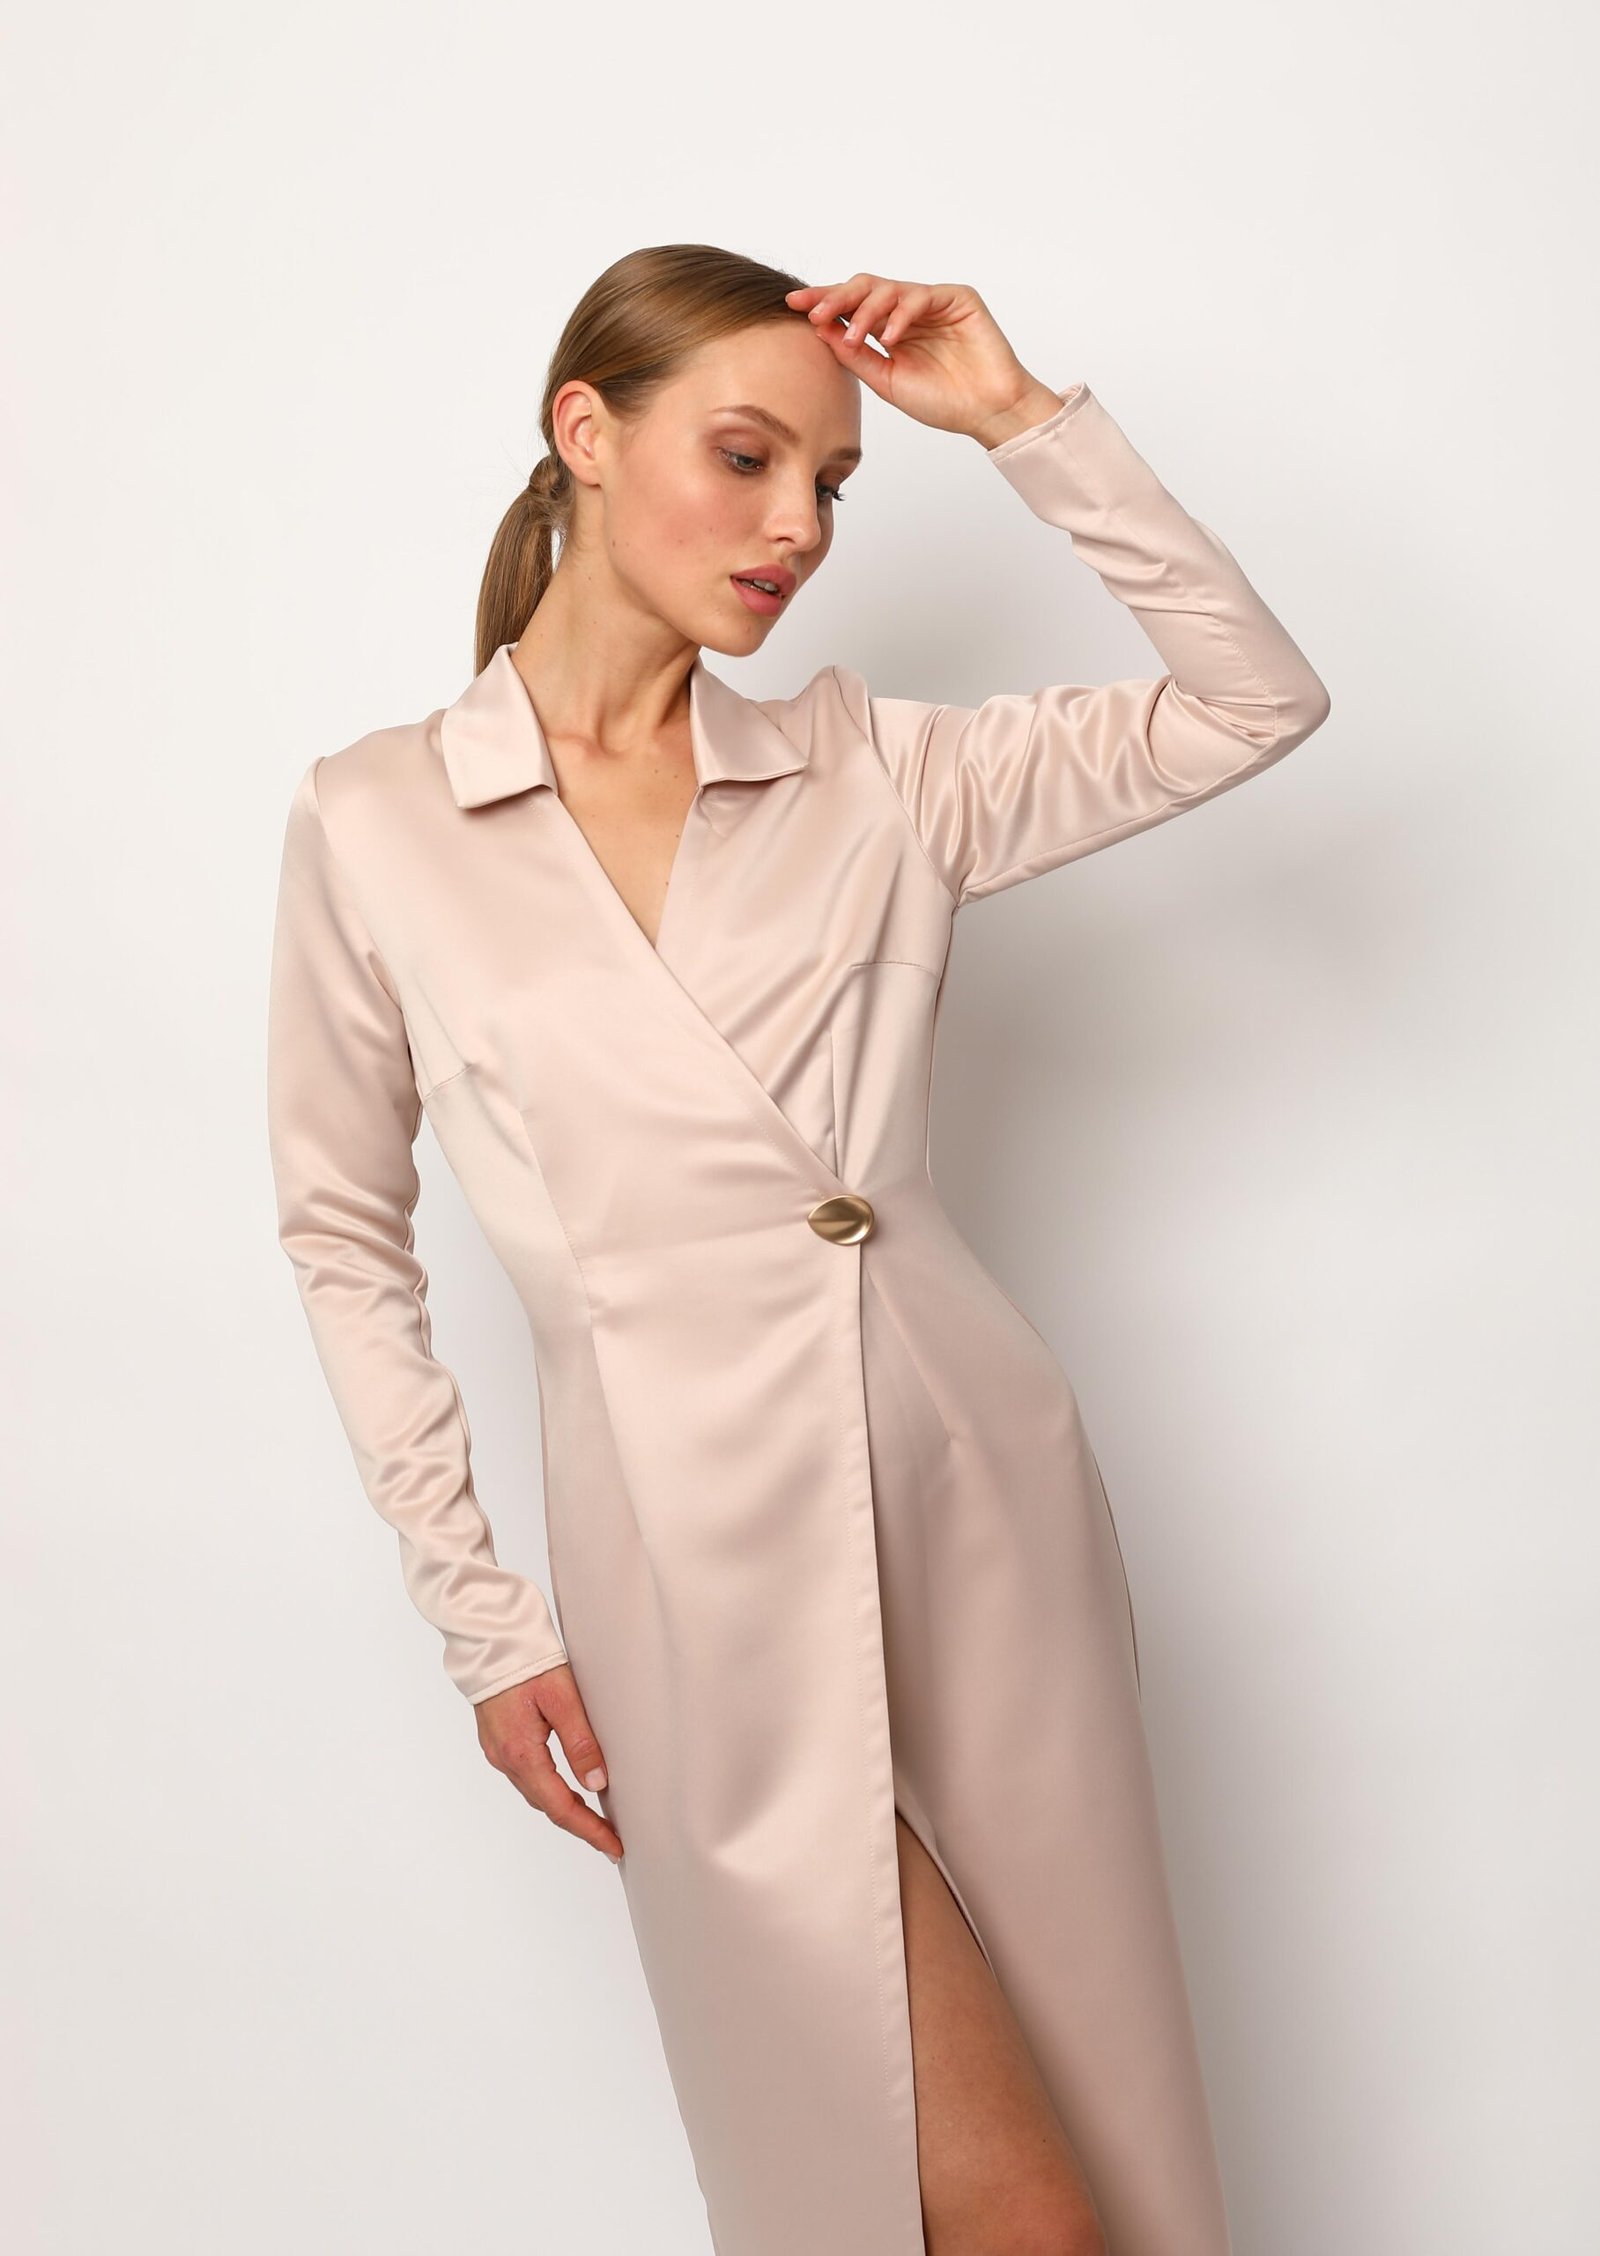 Dress Emilia / beige long sleeve wrap halter dress / casual dress for everyday and special occasions / office rose gold party sexy dress